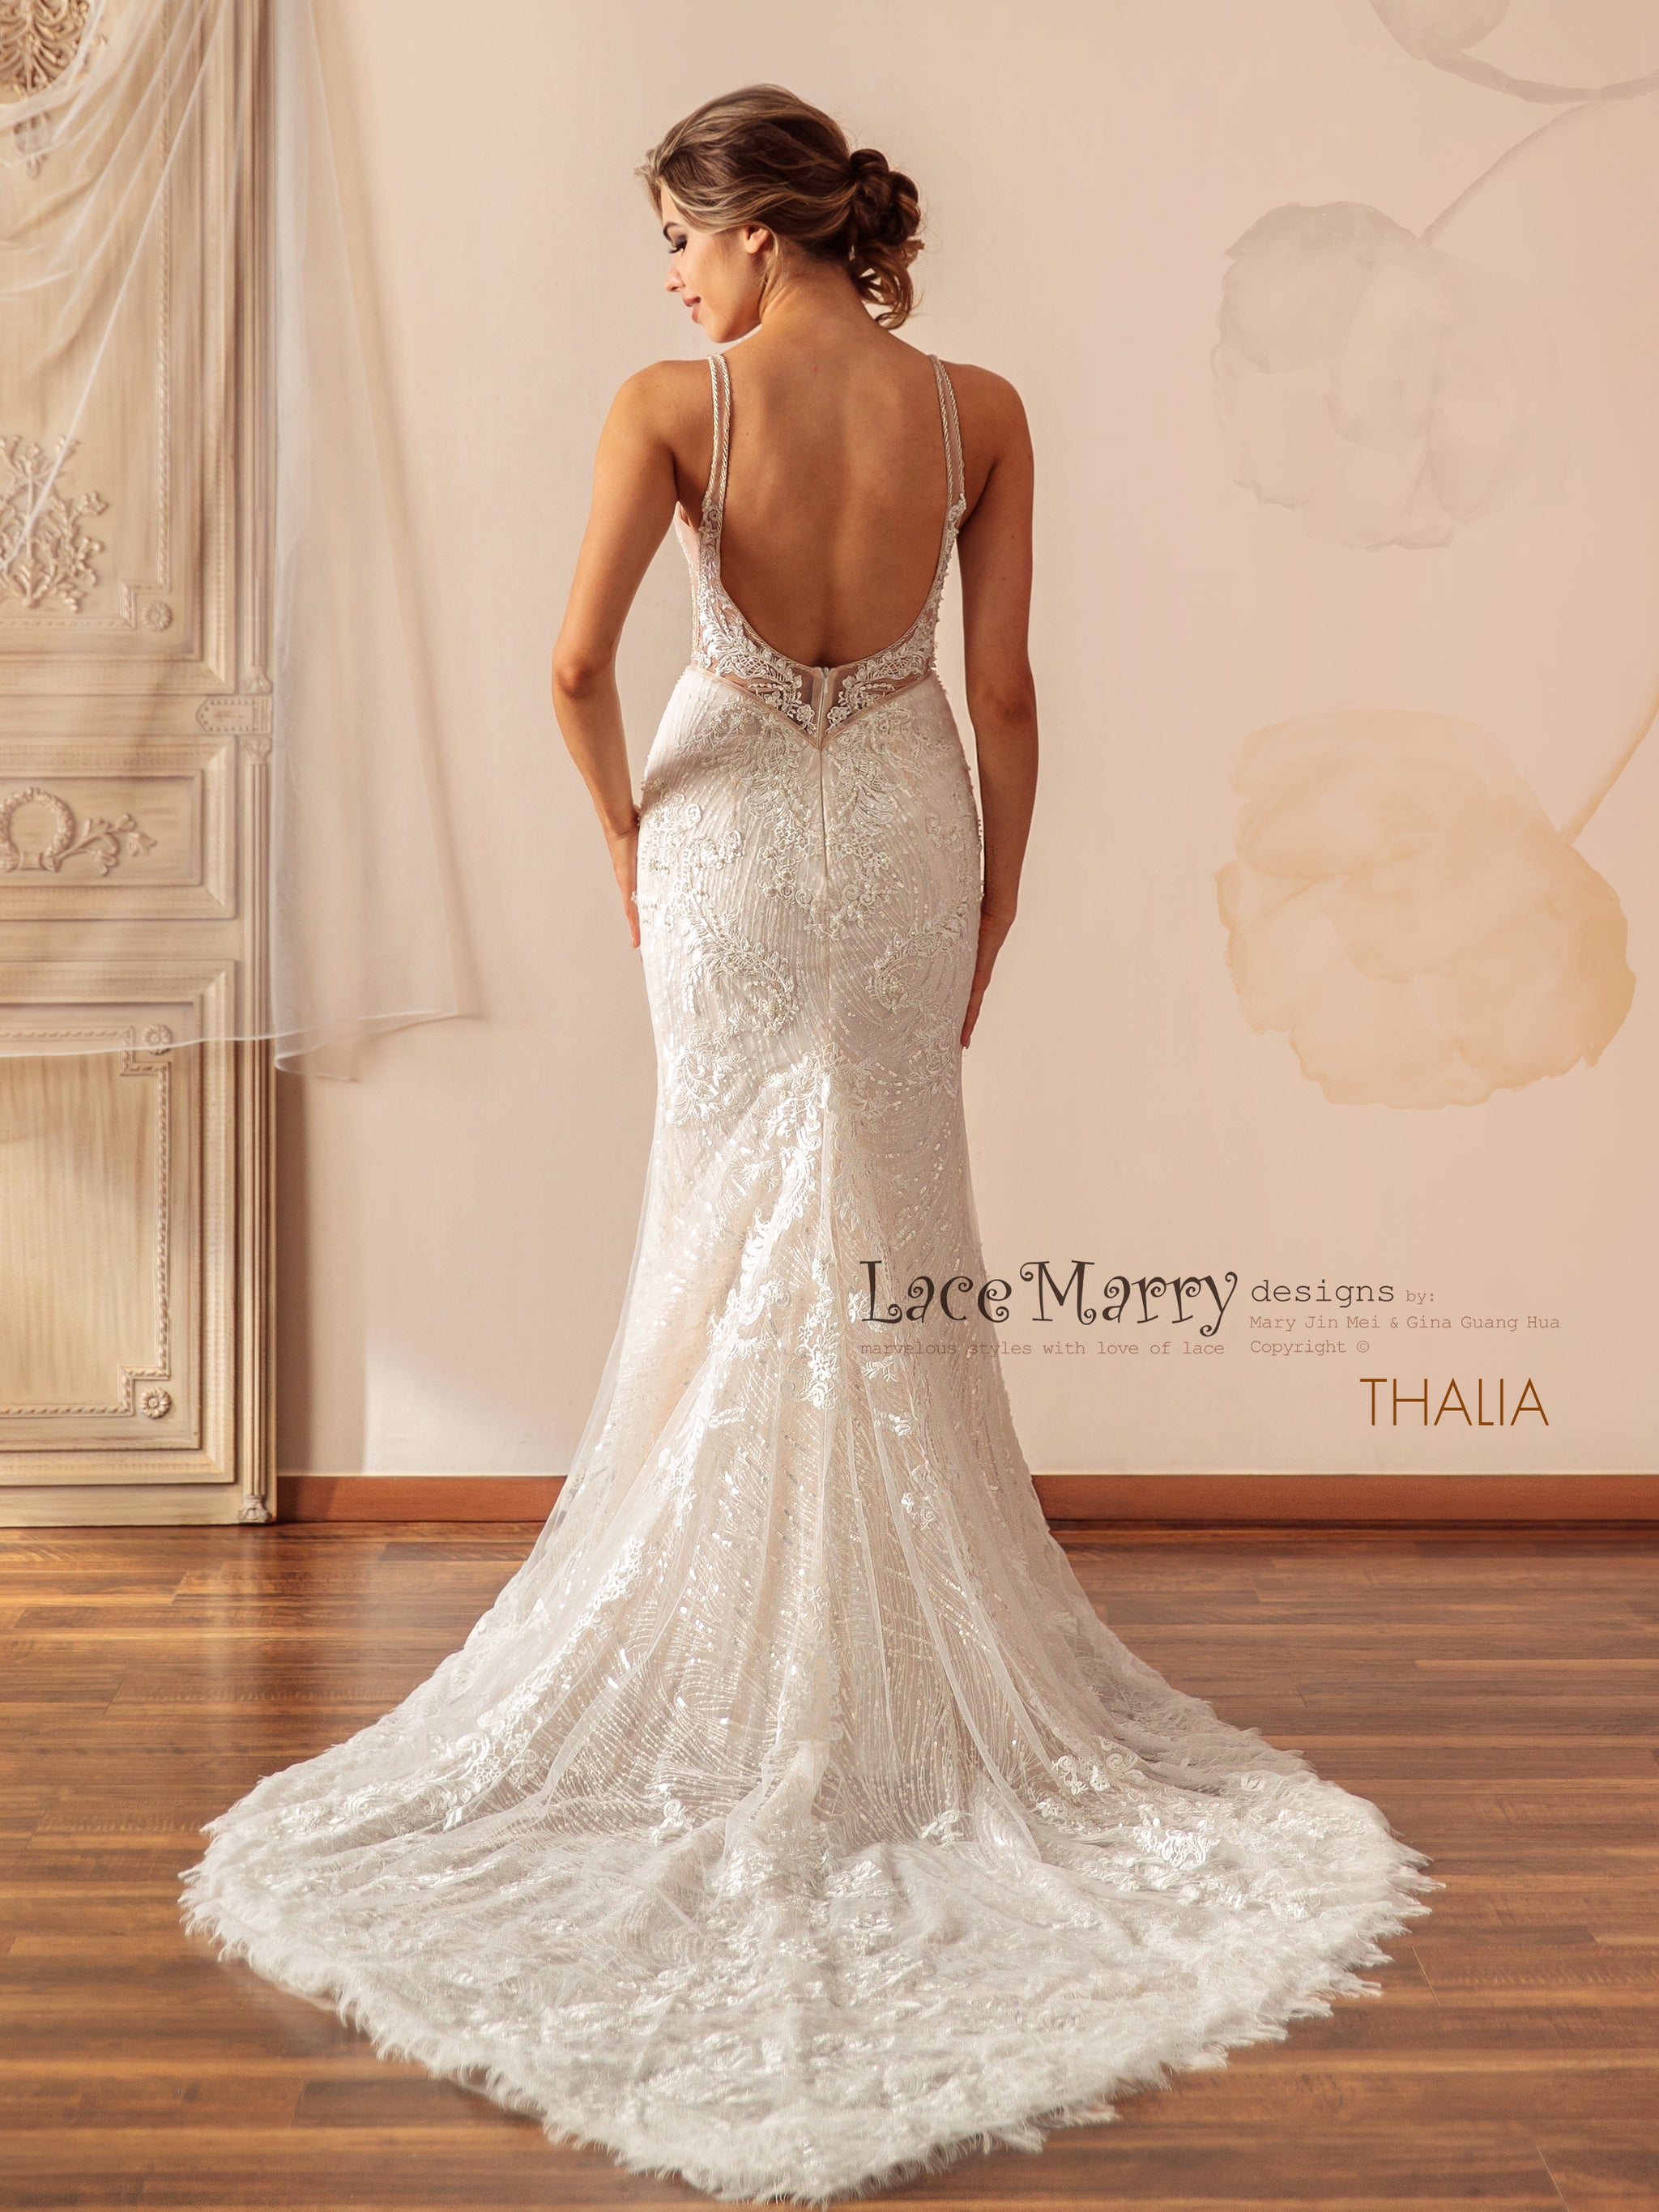 THALIA / Fitted Sparkling Wedding Dress with Deep Plunge - LaceMarry